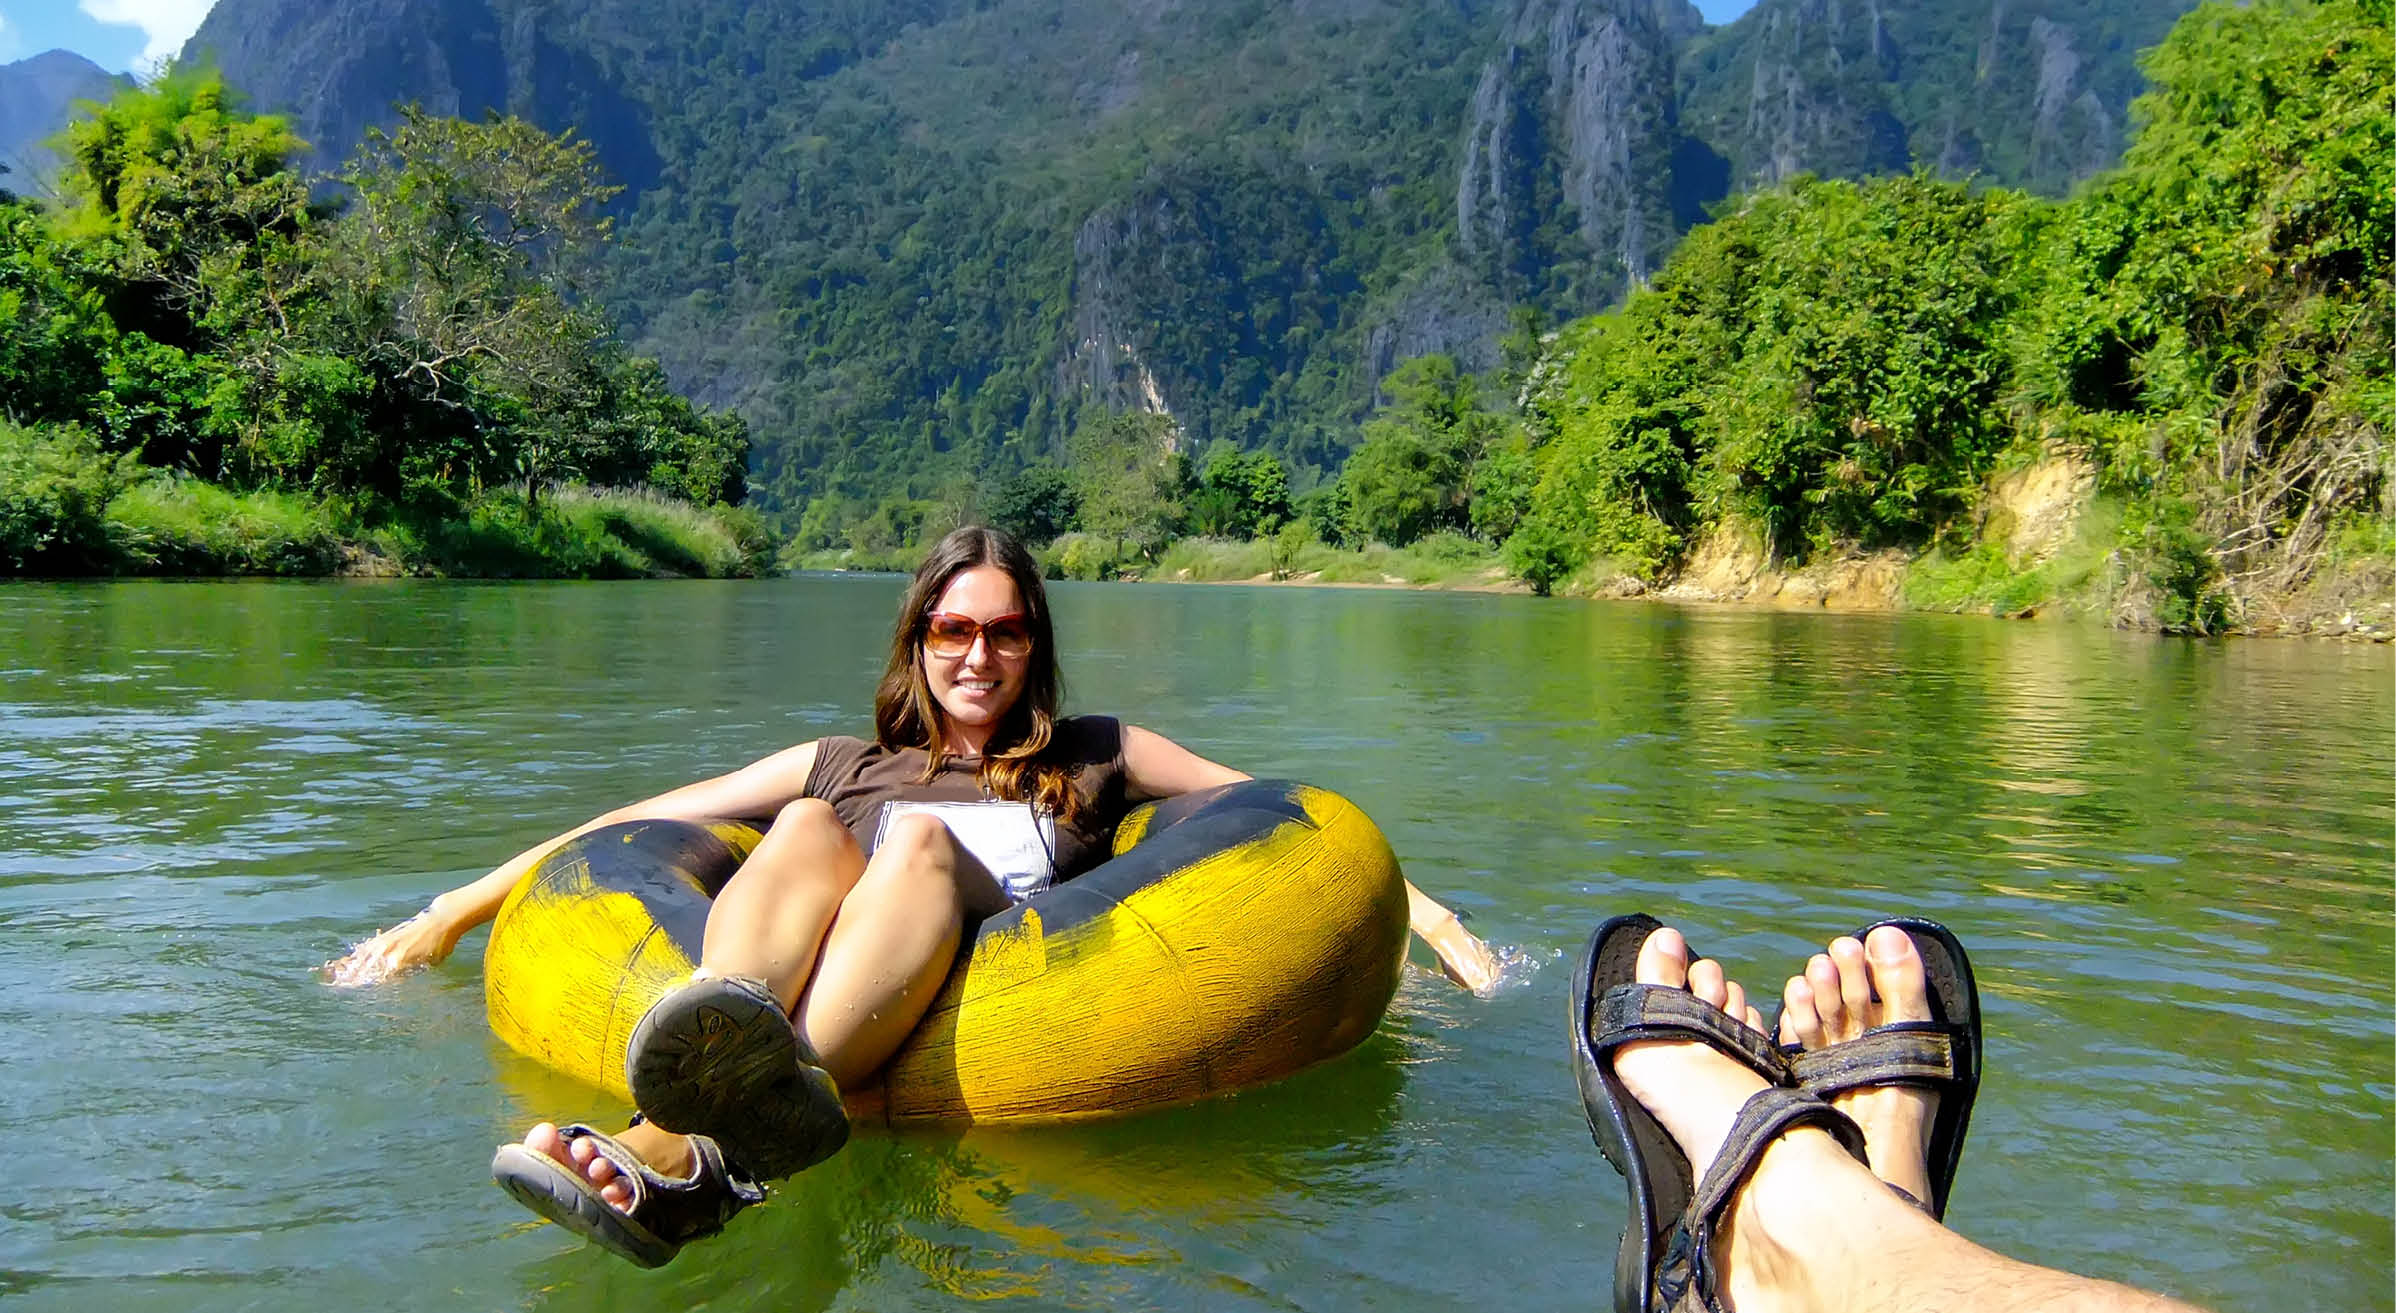 Couple going down Nam Song River in a tube surrounded by karst scenery in Vang Vieng, Laos. Tubing is a popular tourist activity in Vang Vieng.